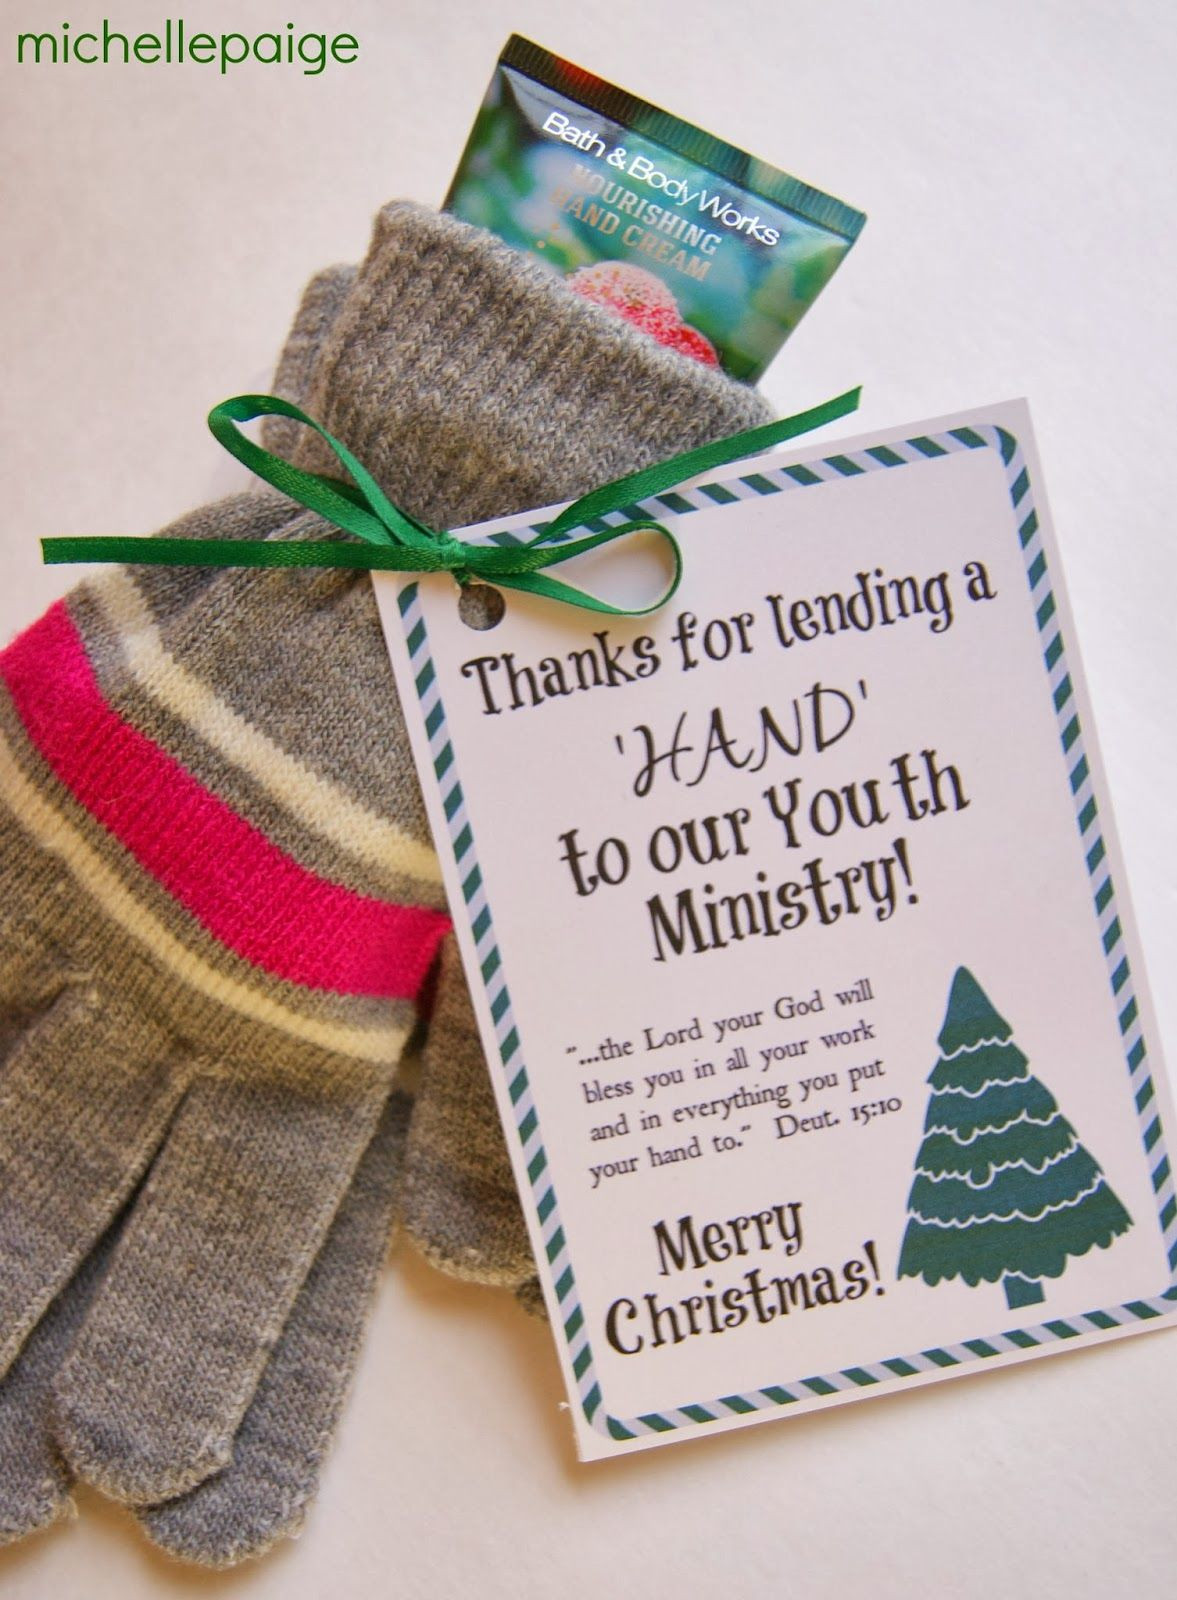 Inexpensive Thank You Gift Ideas For Volunteers
 Volunteer thank you t idea using winter gloves and hand